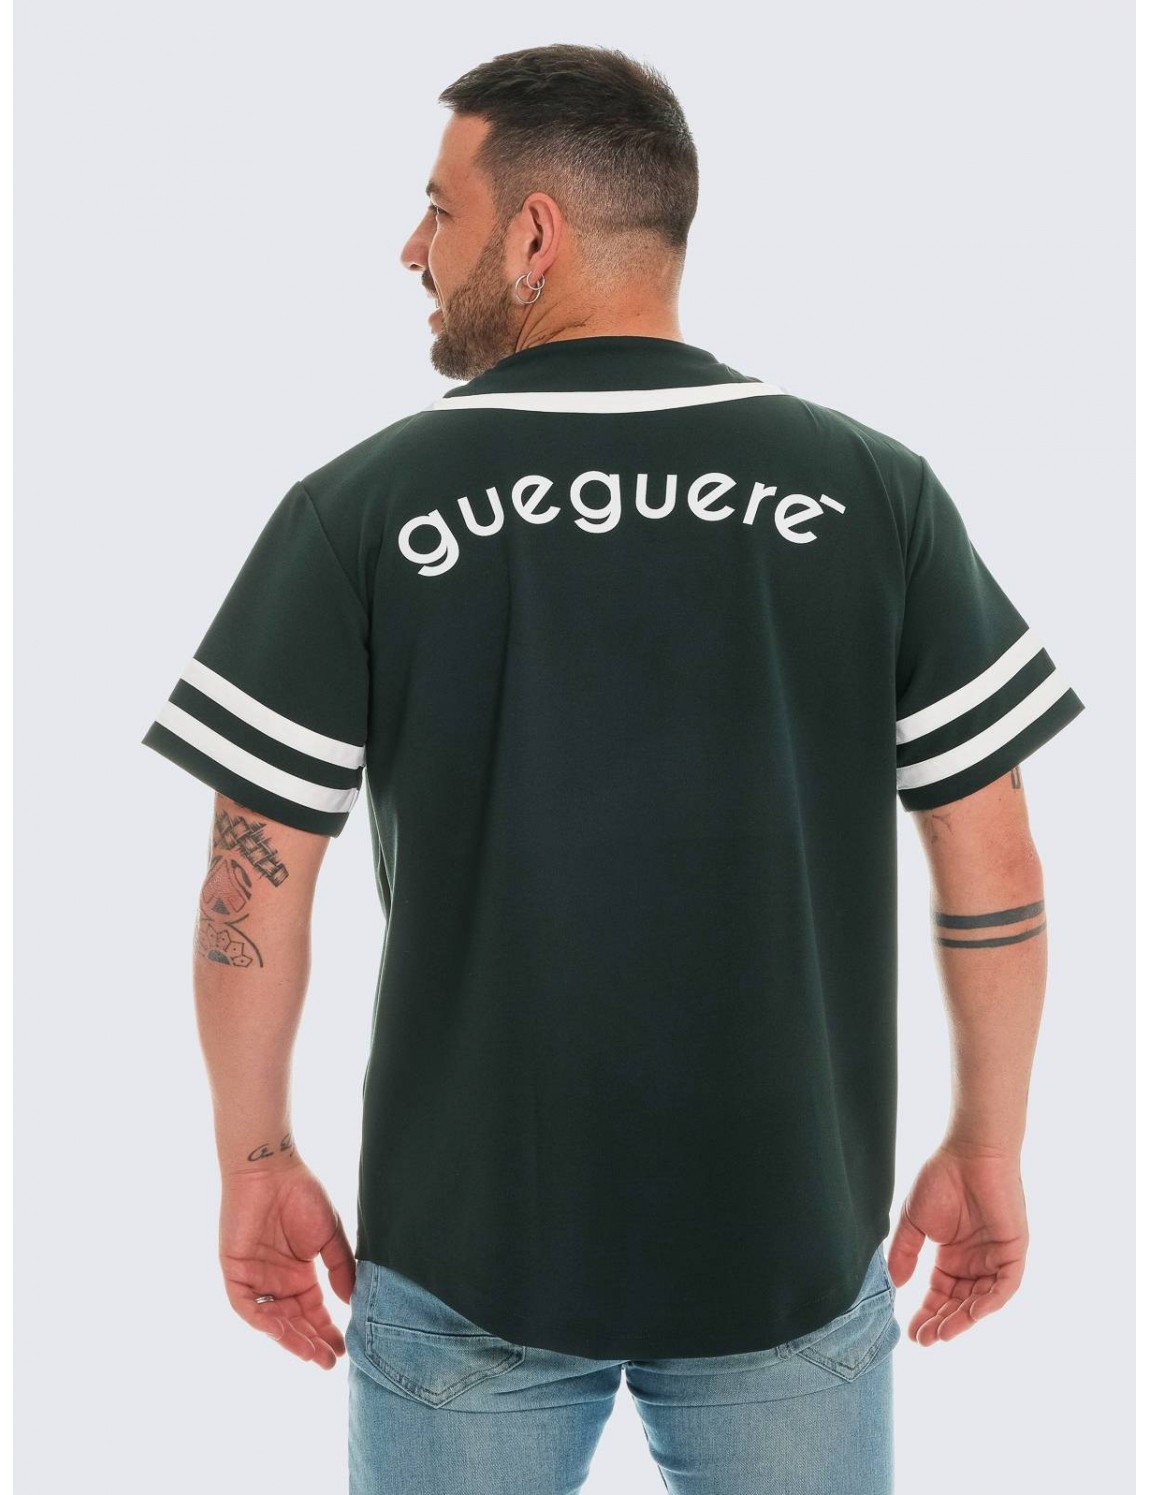 Long t-shirt Baseball Style special for men and dancing.